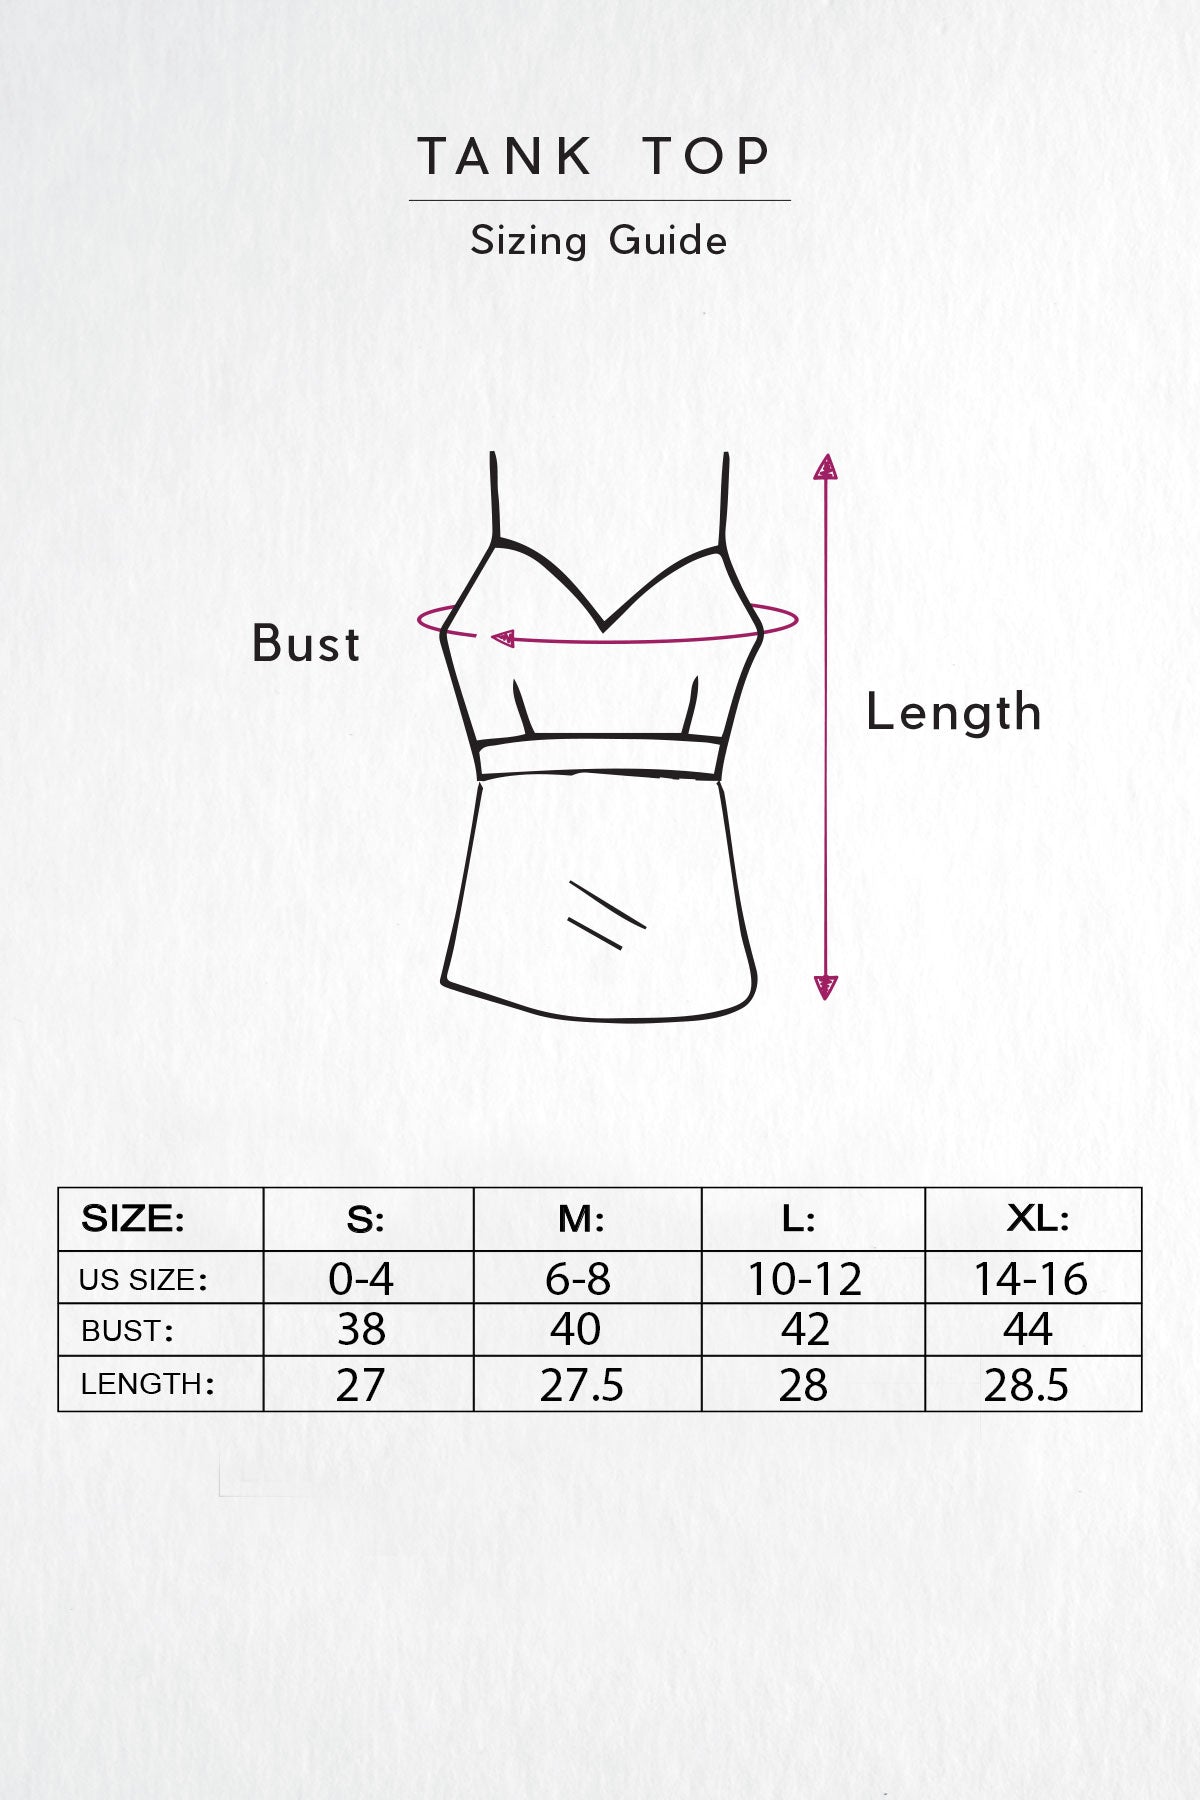 Tank Top Sizing Guide.